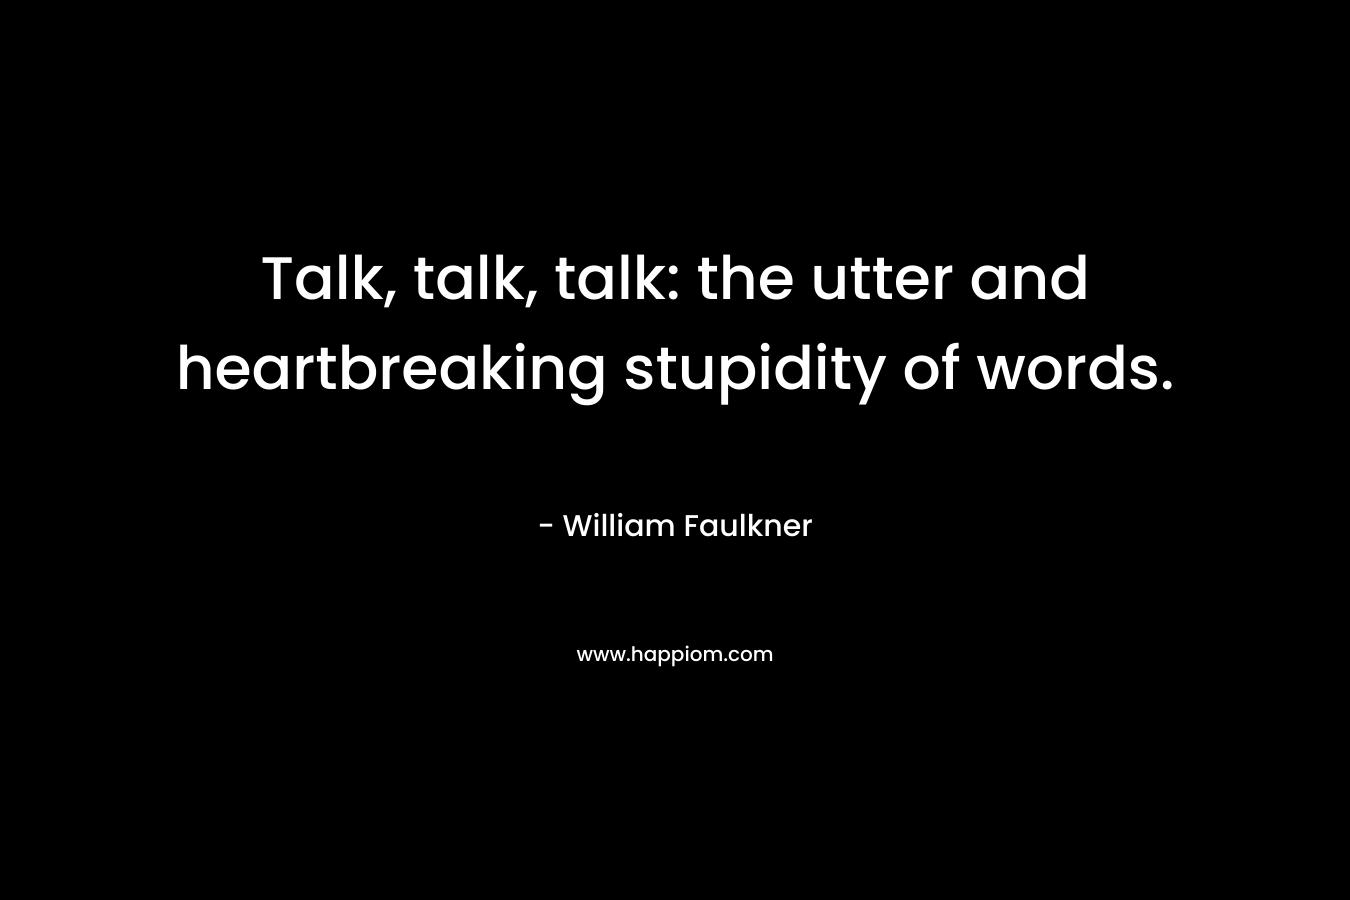 Talk, talk, talk: the utter and heartbreaking stupidity of words.